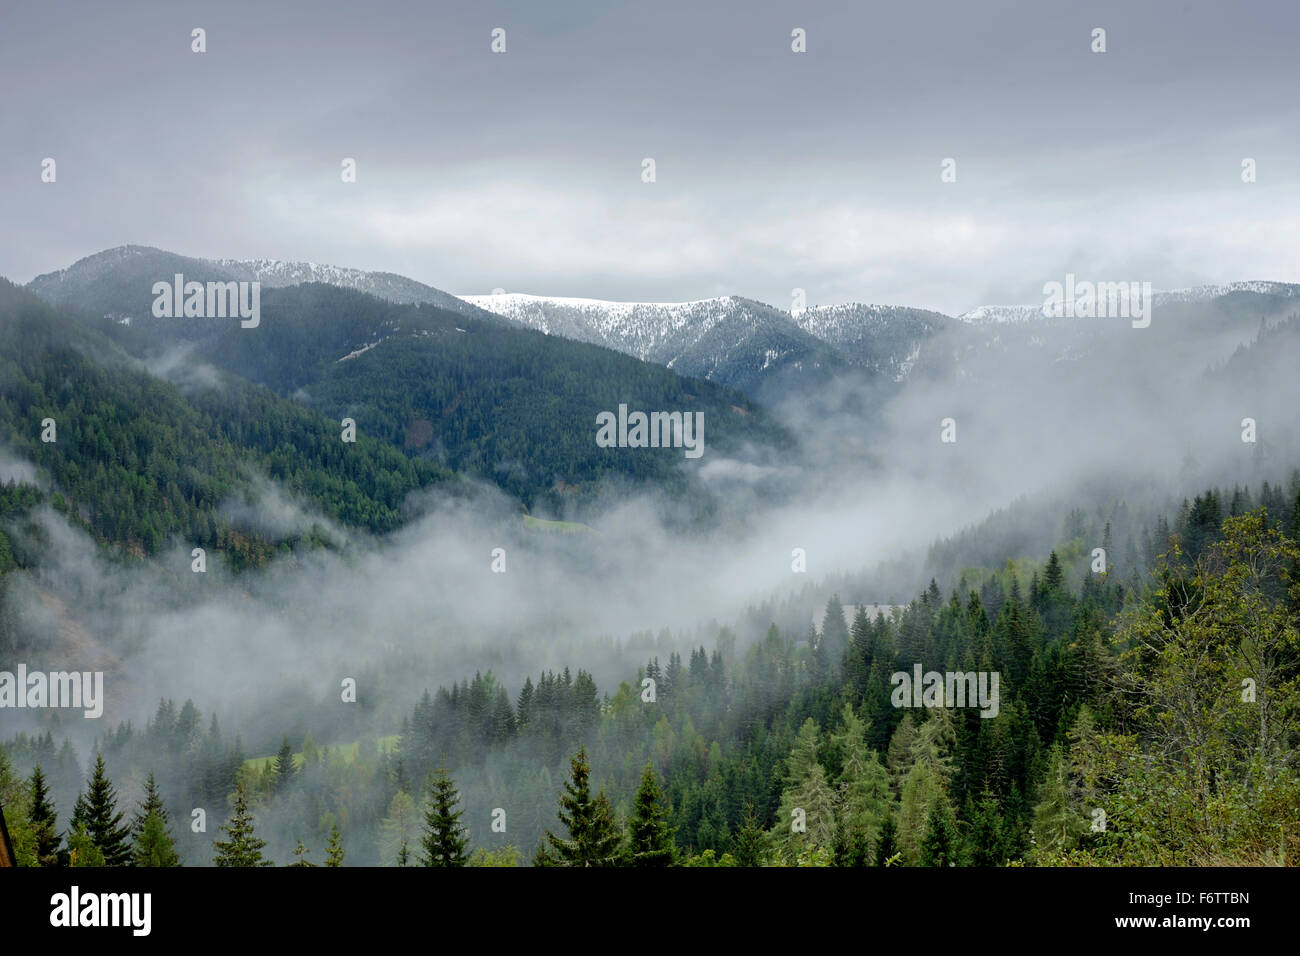 Austria, Styria, Murau, snow-capped mountains and fog in the valley Stock Photo